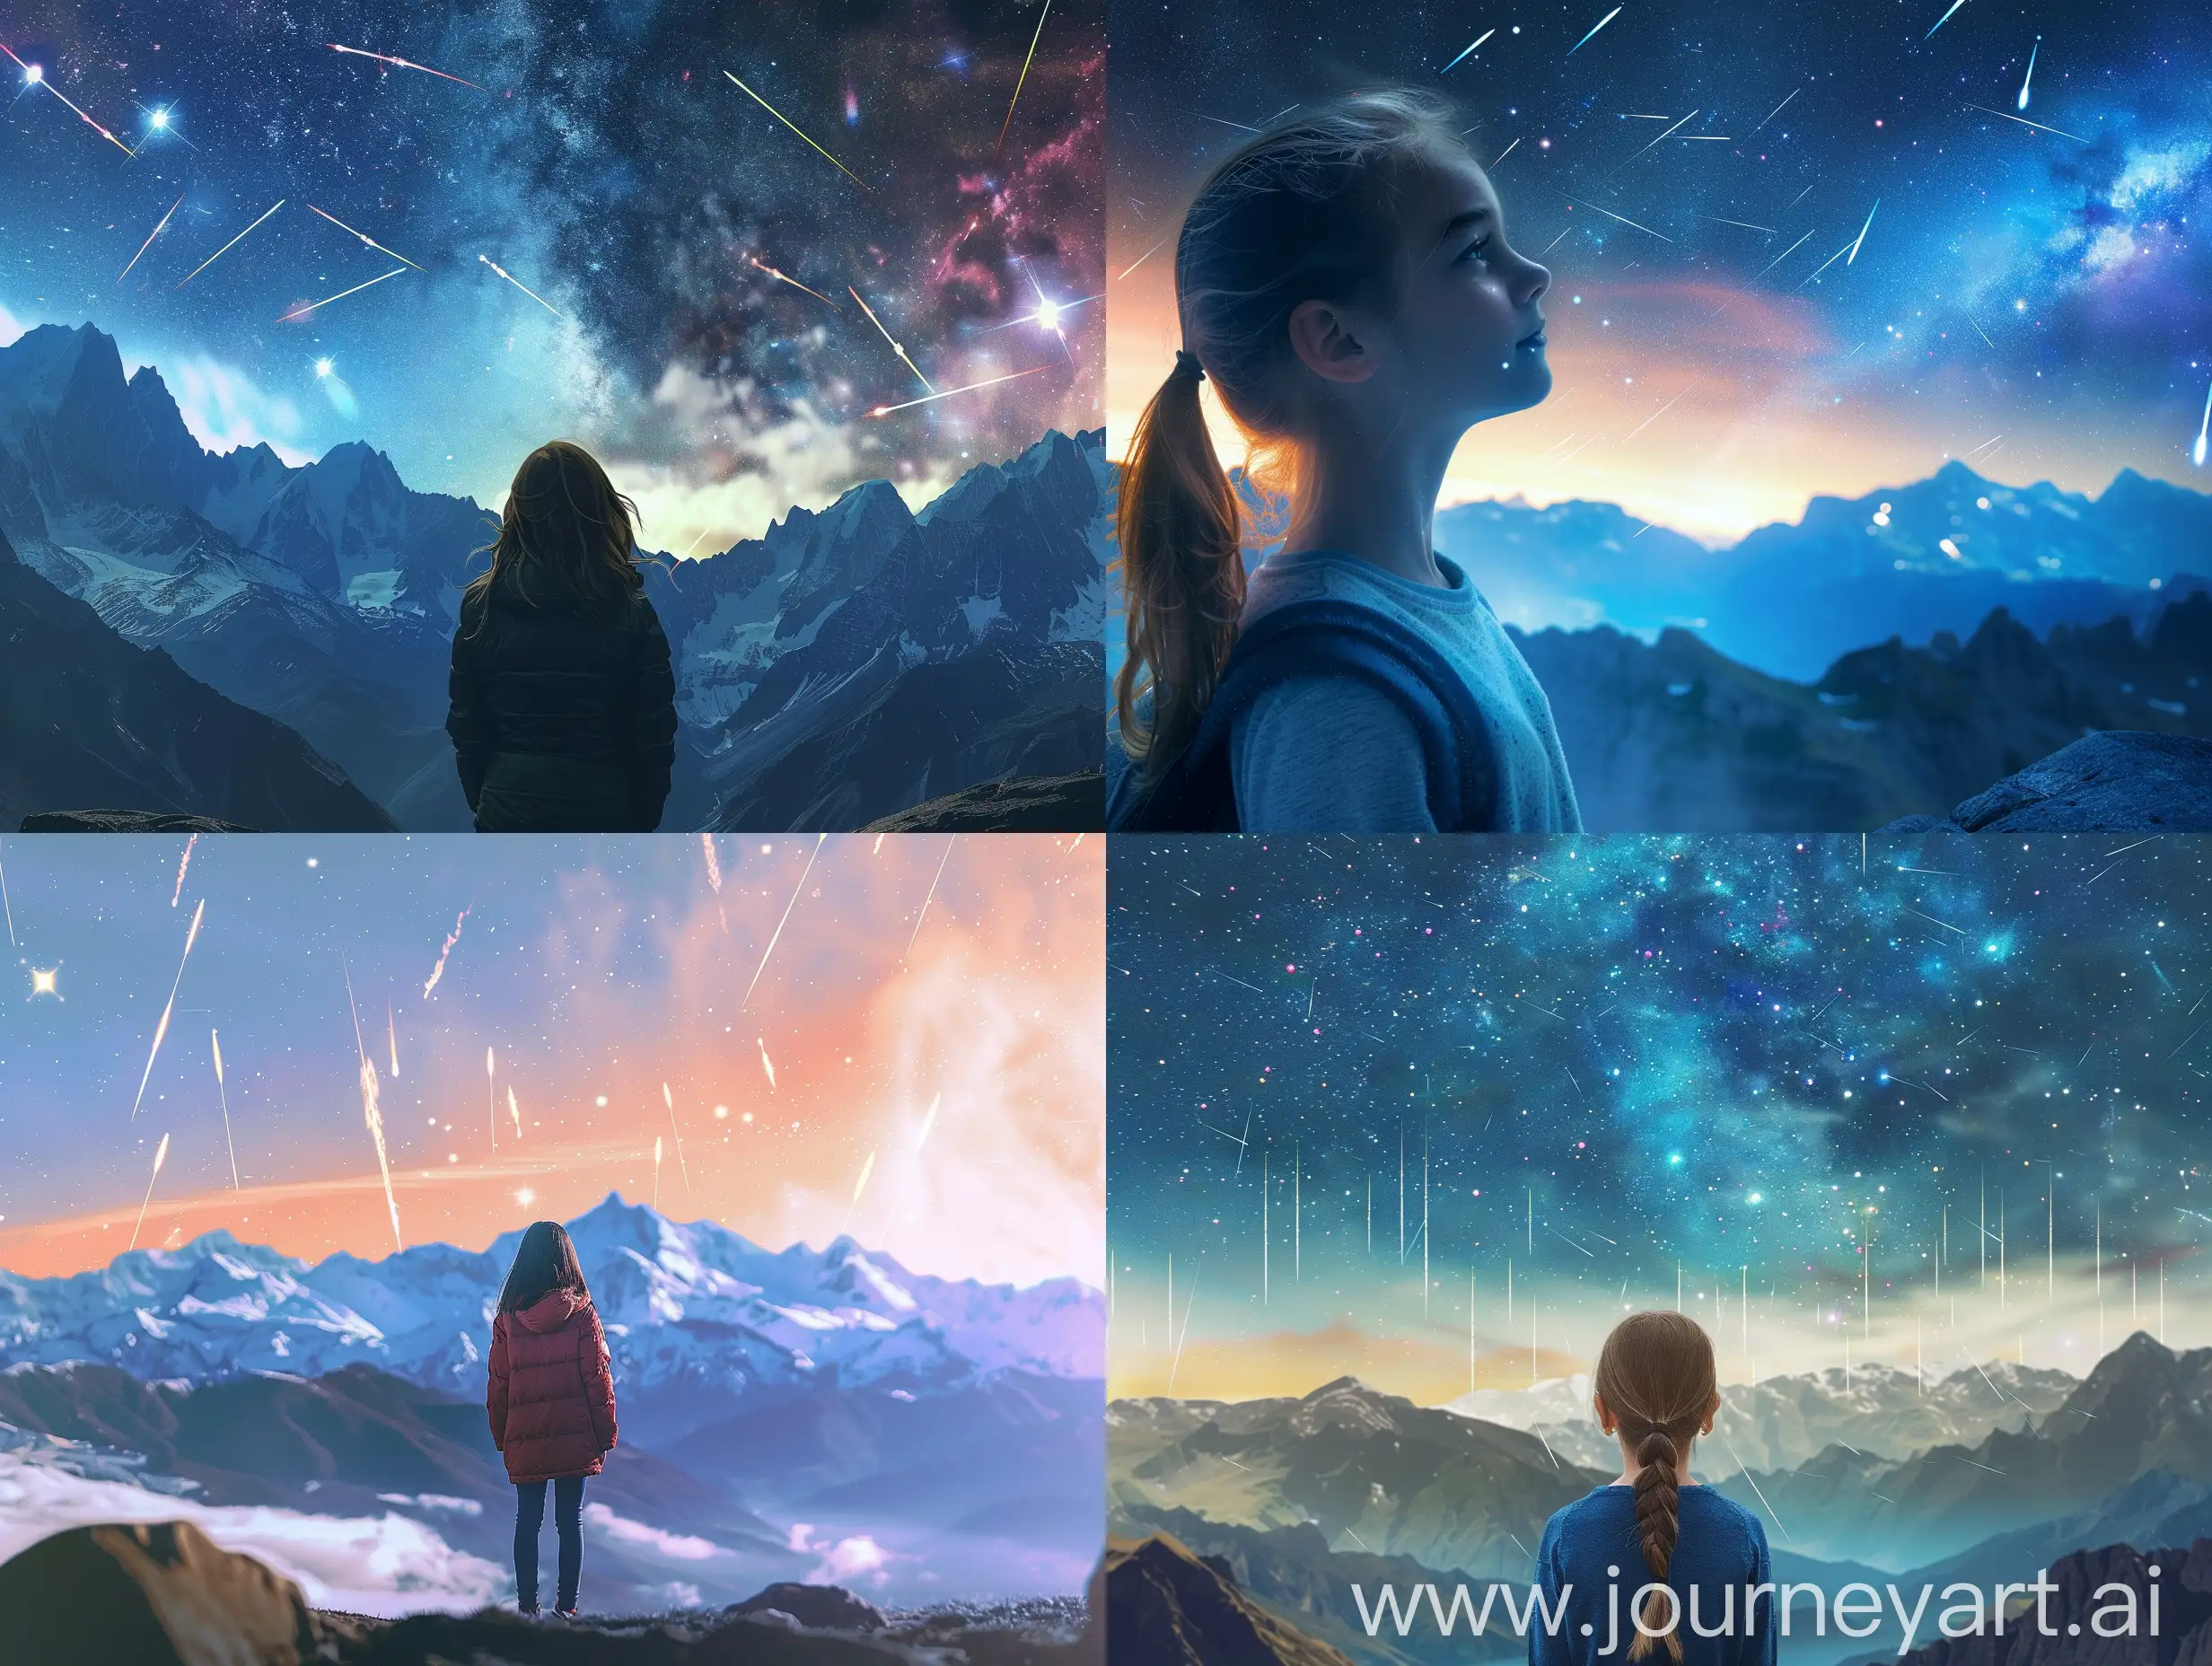 Young-Girl-Admiring-Shooting-Stars-in-Mountainous-Landscape